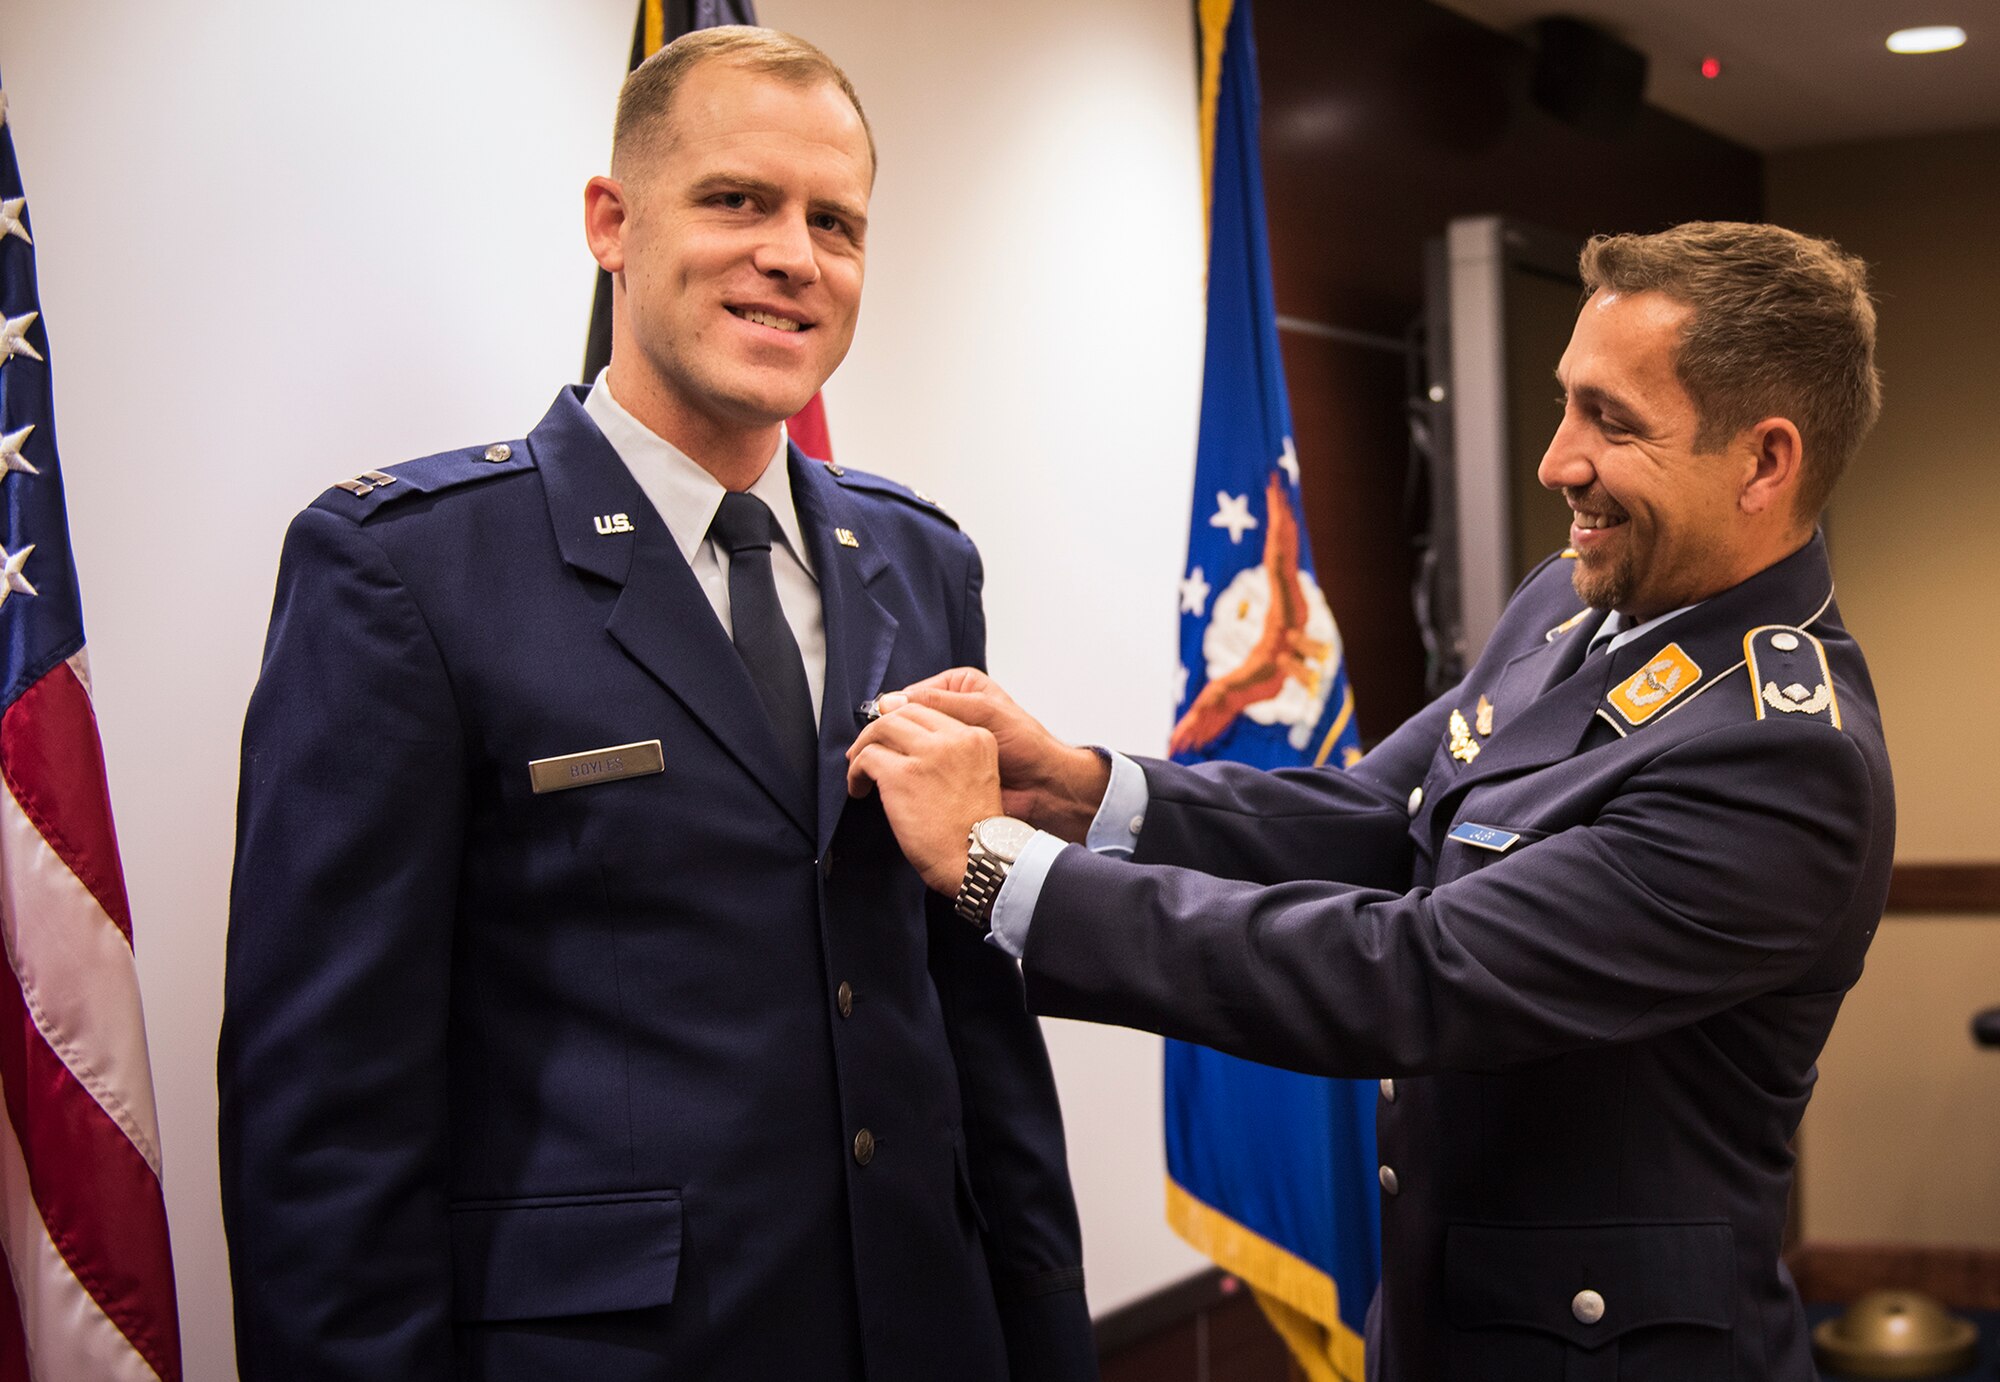 An advanced weapons technology Airman here received the German Cross of Honor bronze medal Nov. 30.